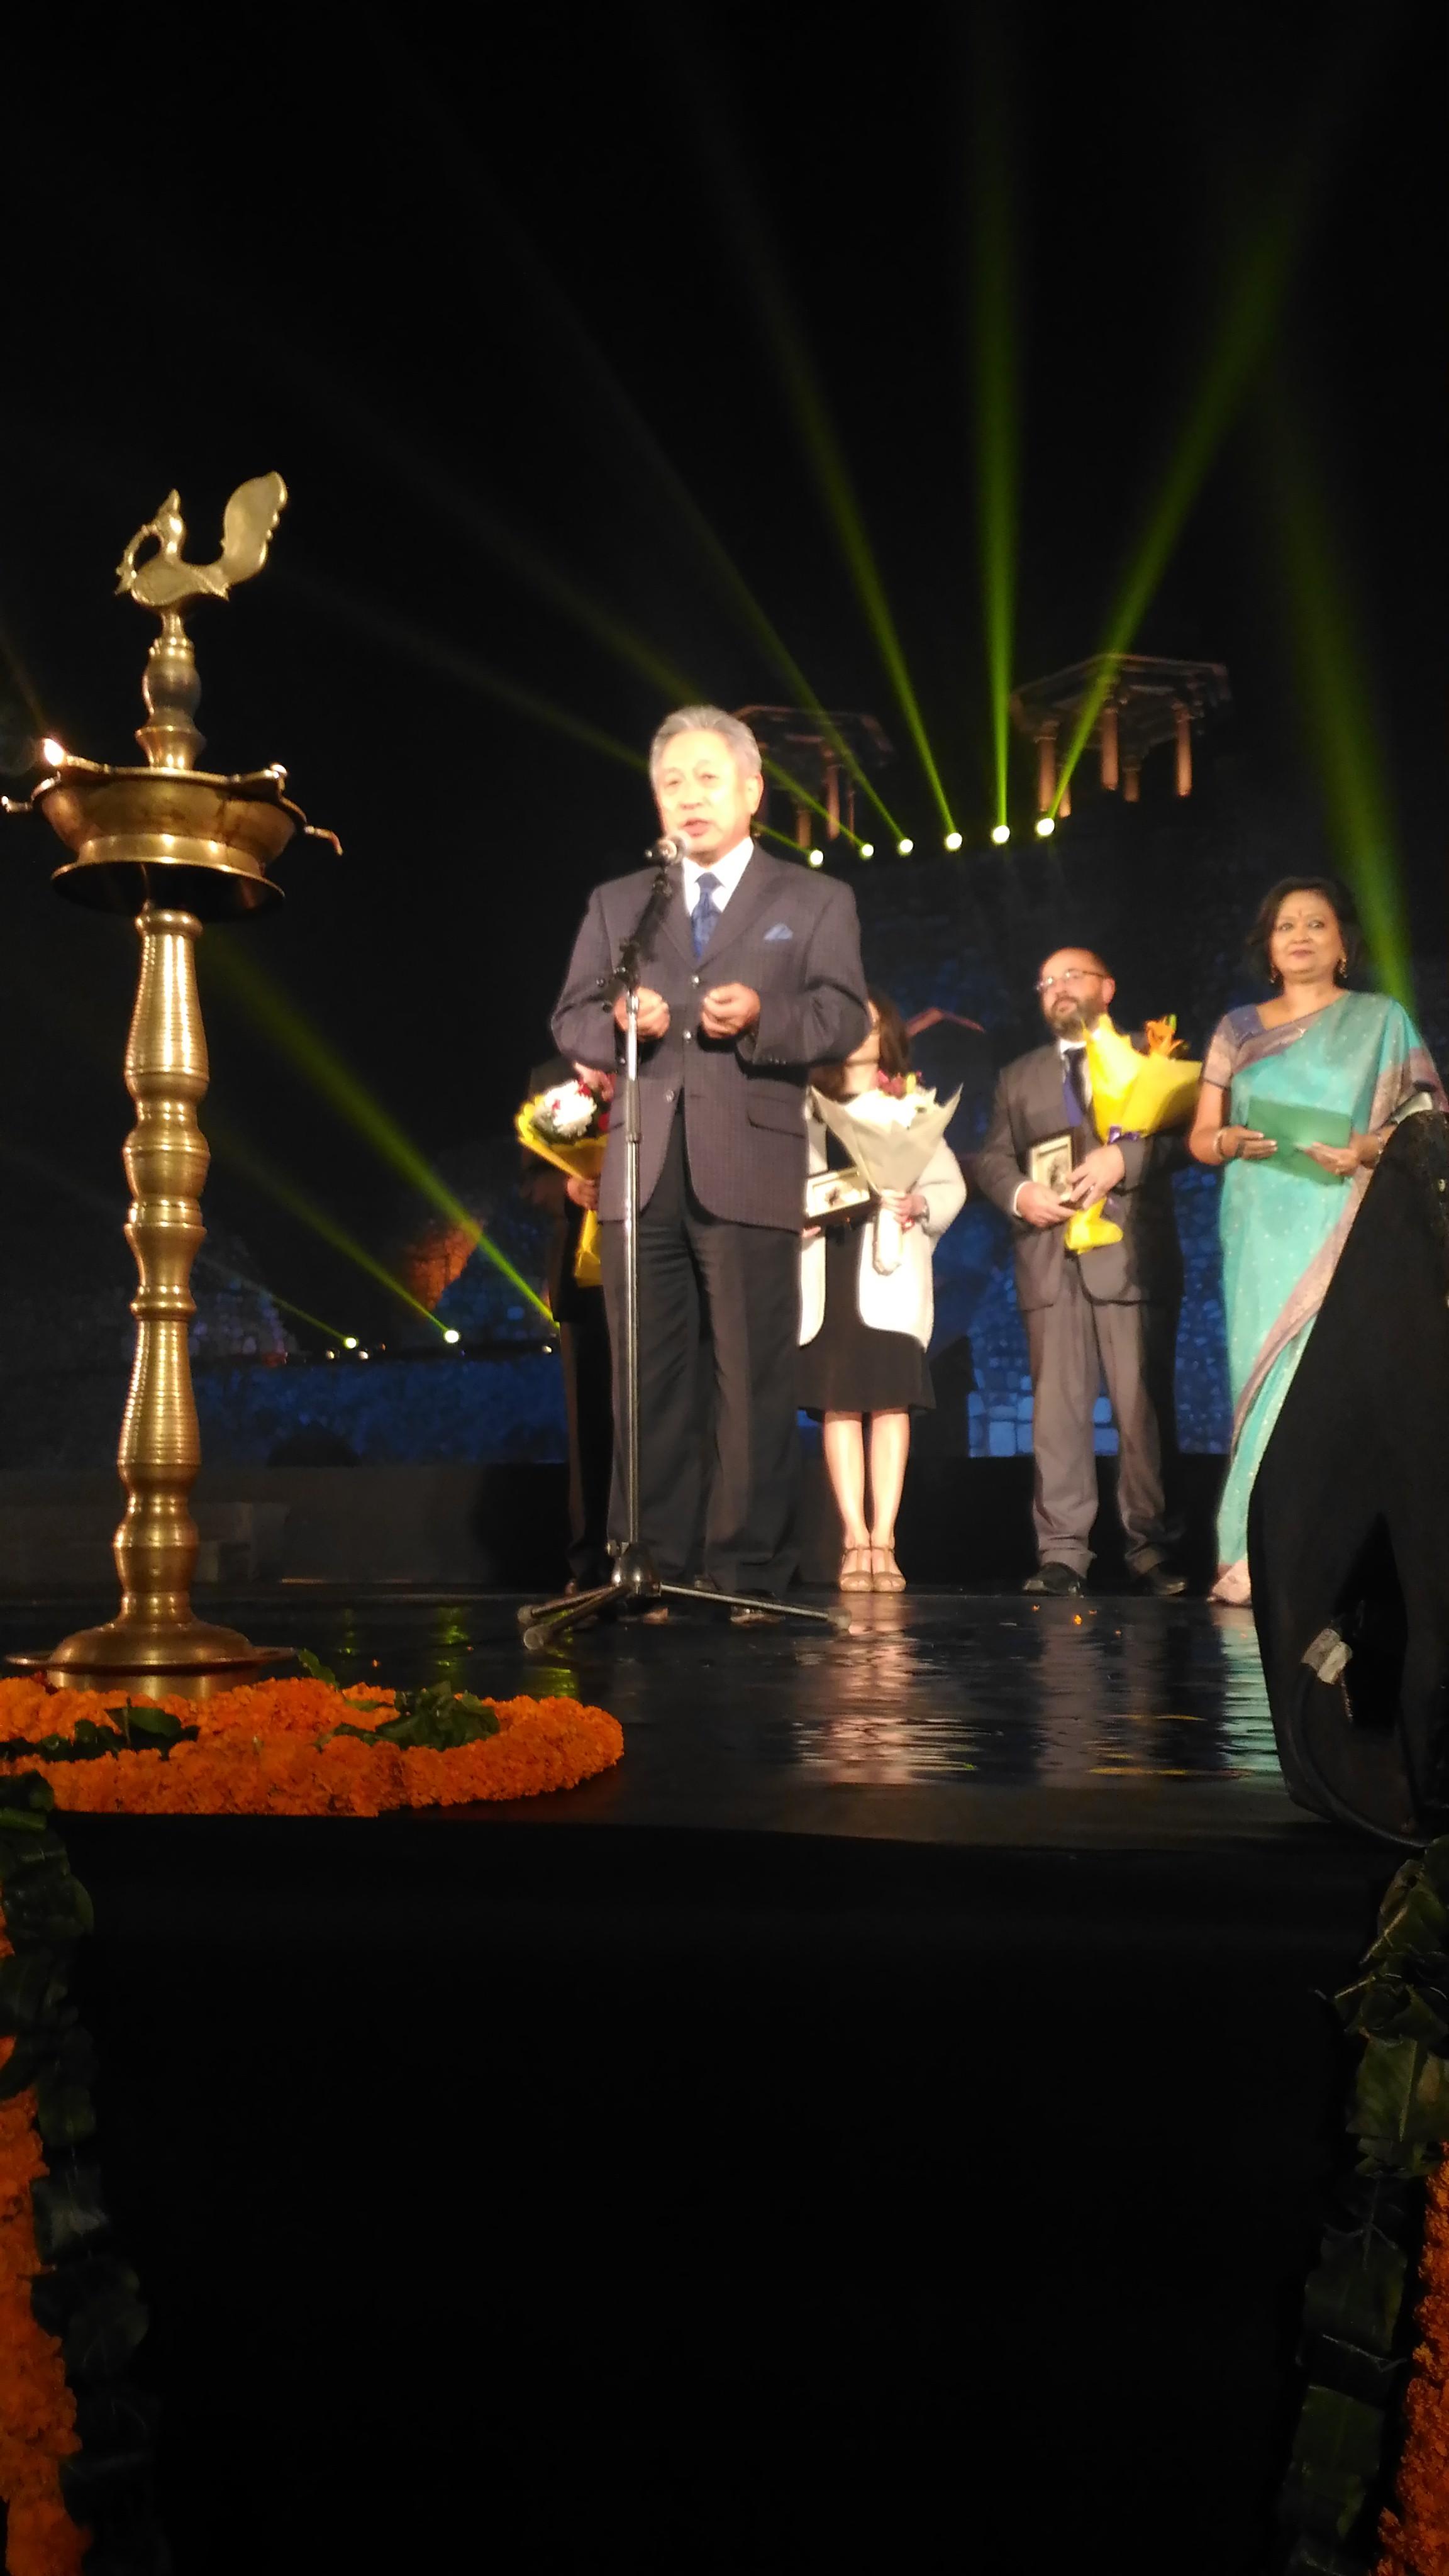 H.E. Amb. Tien delivered a speech in the opening ceremony